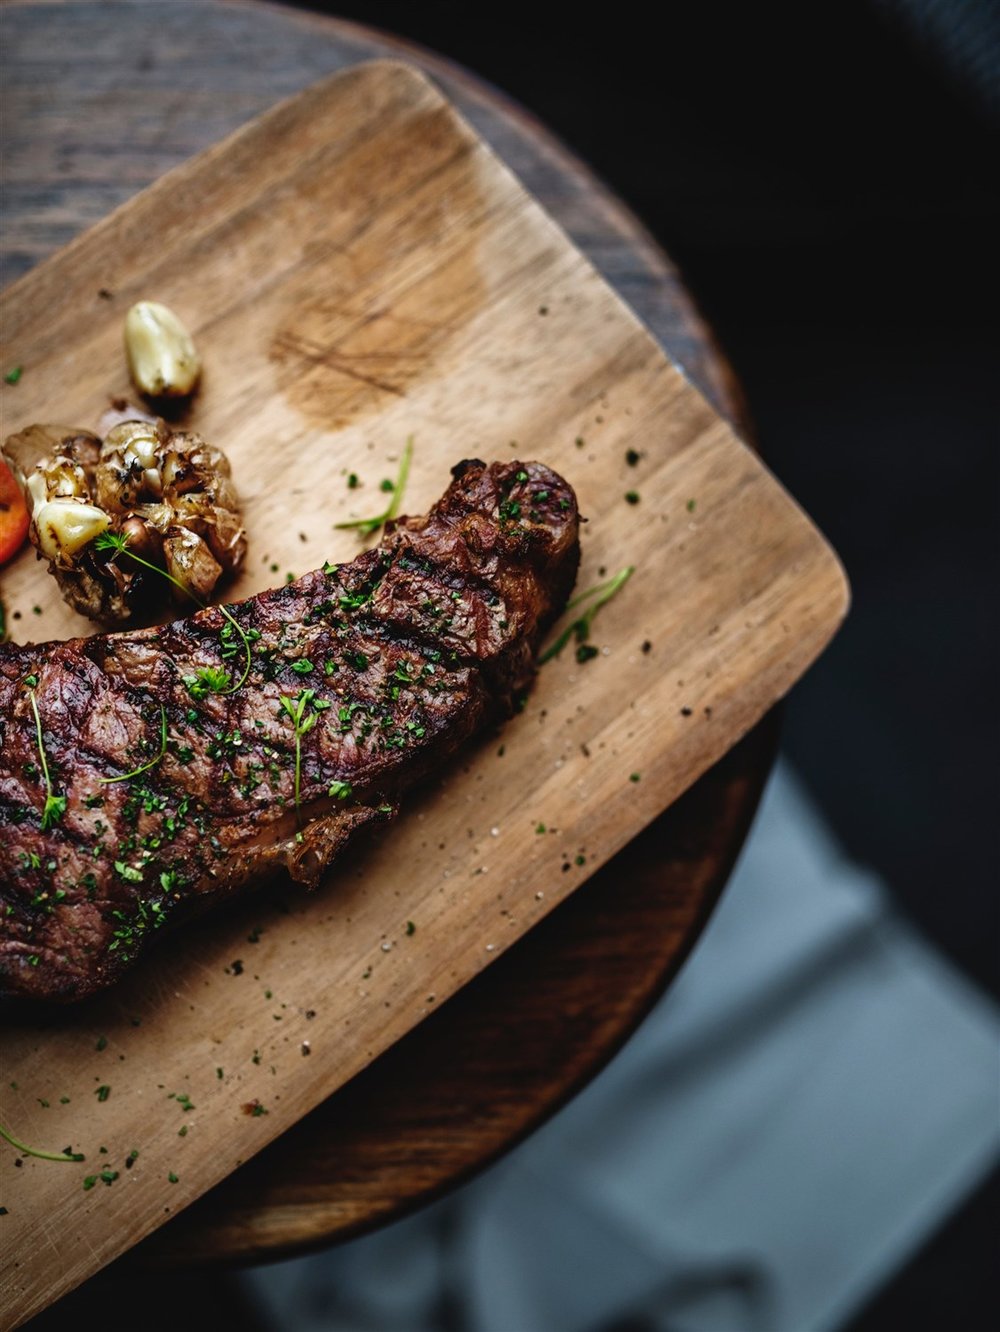  Tahoe South’s fine dining scene is a jackpot for skiers and snowboarders who like excellent steaks and chops.   Rawpixel    |    Unsplash   